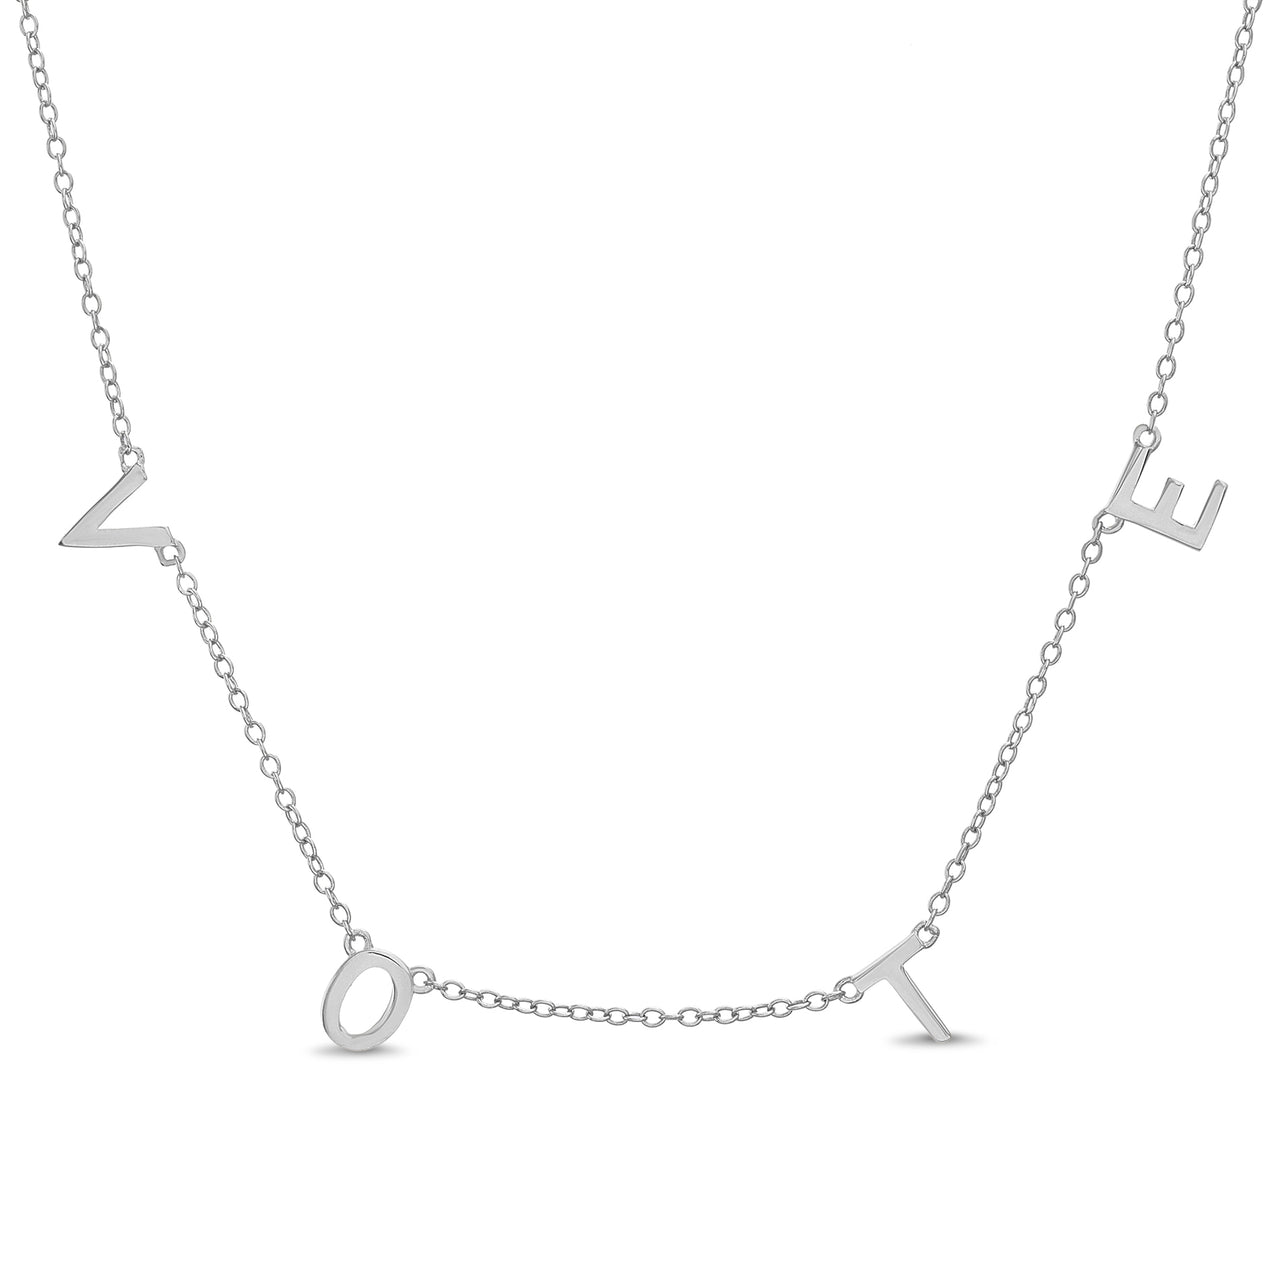 Beloved & Inspired "VOTE" Station Rolo Chain Necklace in Sterling Silver